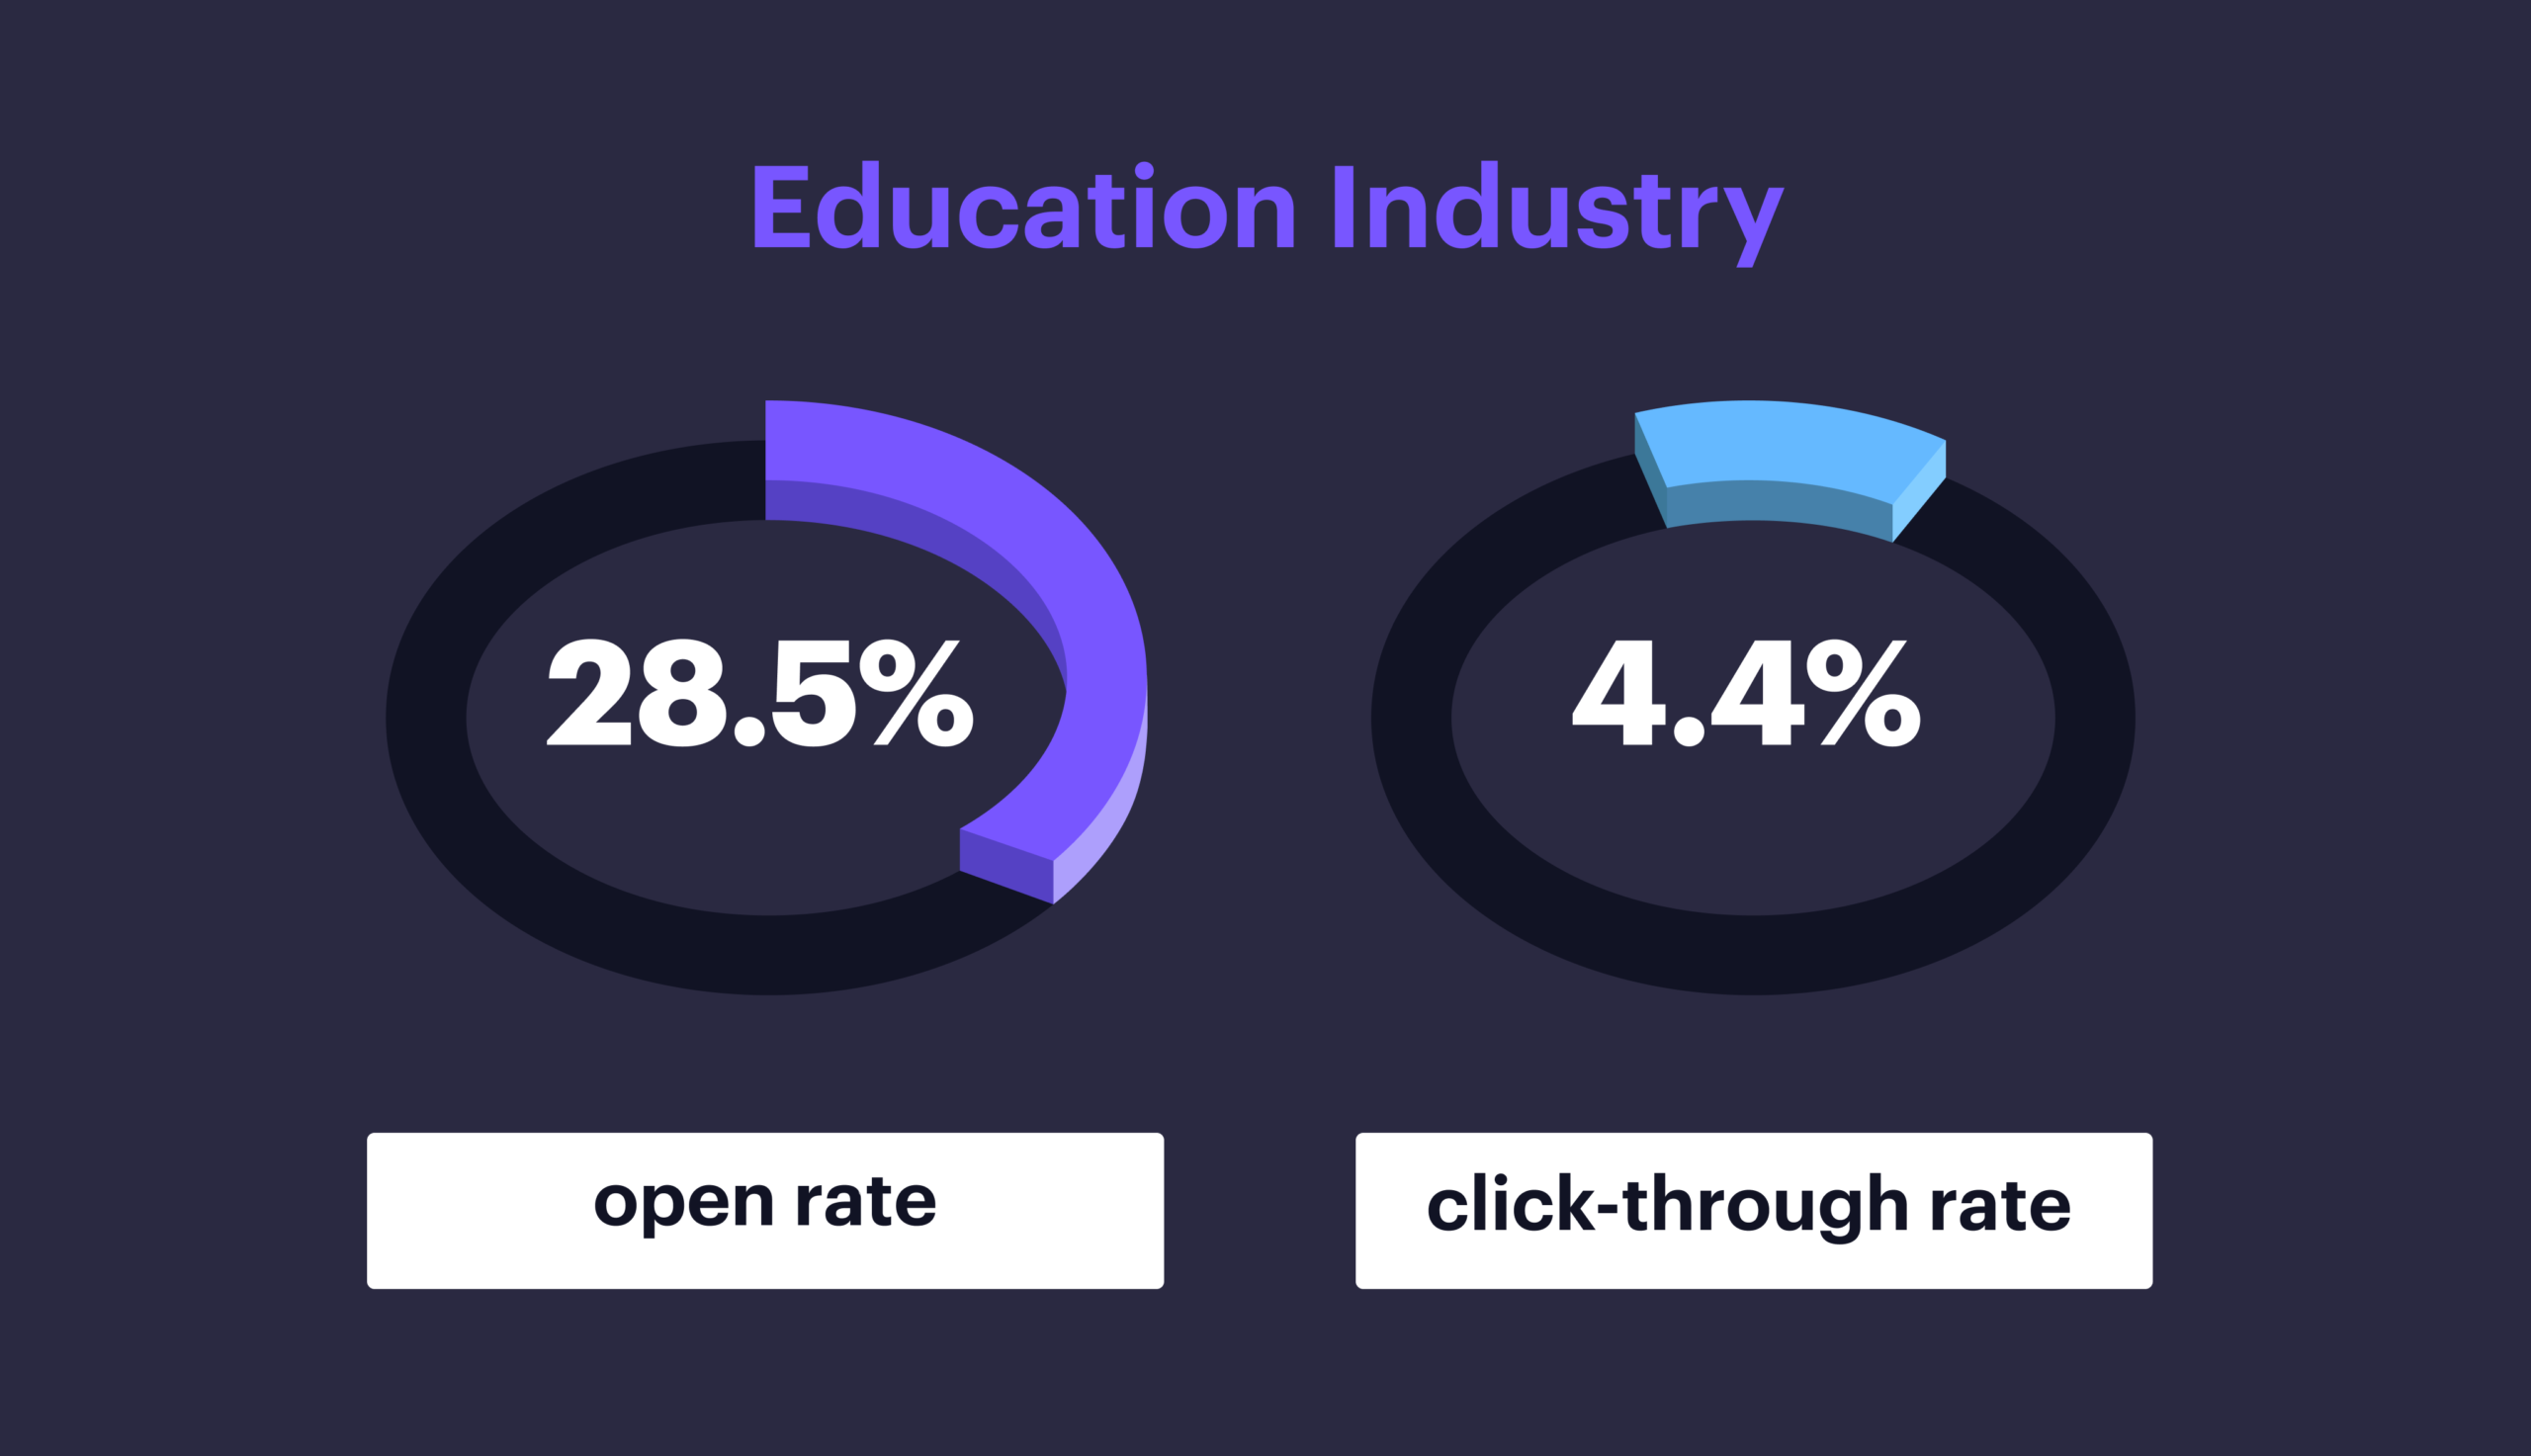 Open rate and click through rate for education industry in 2021.